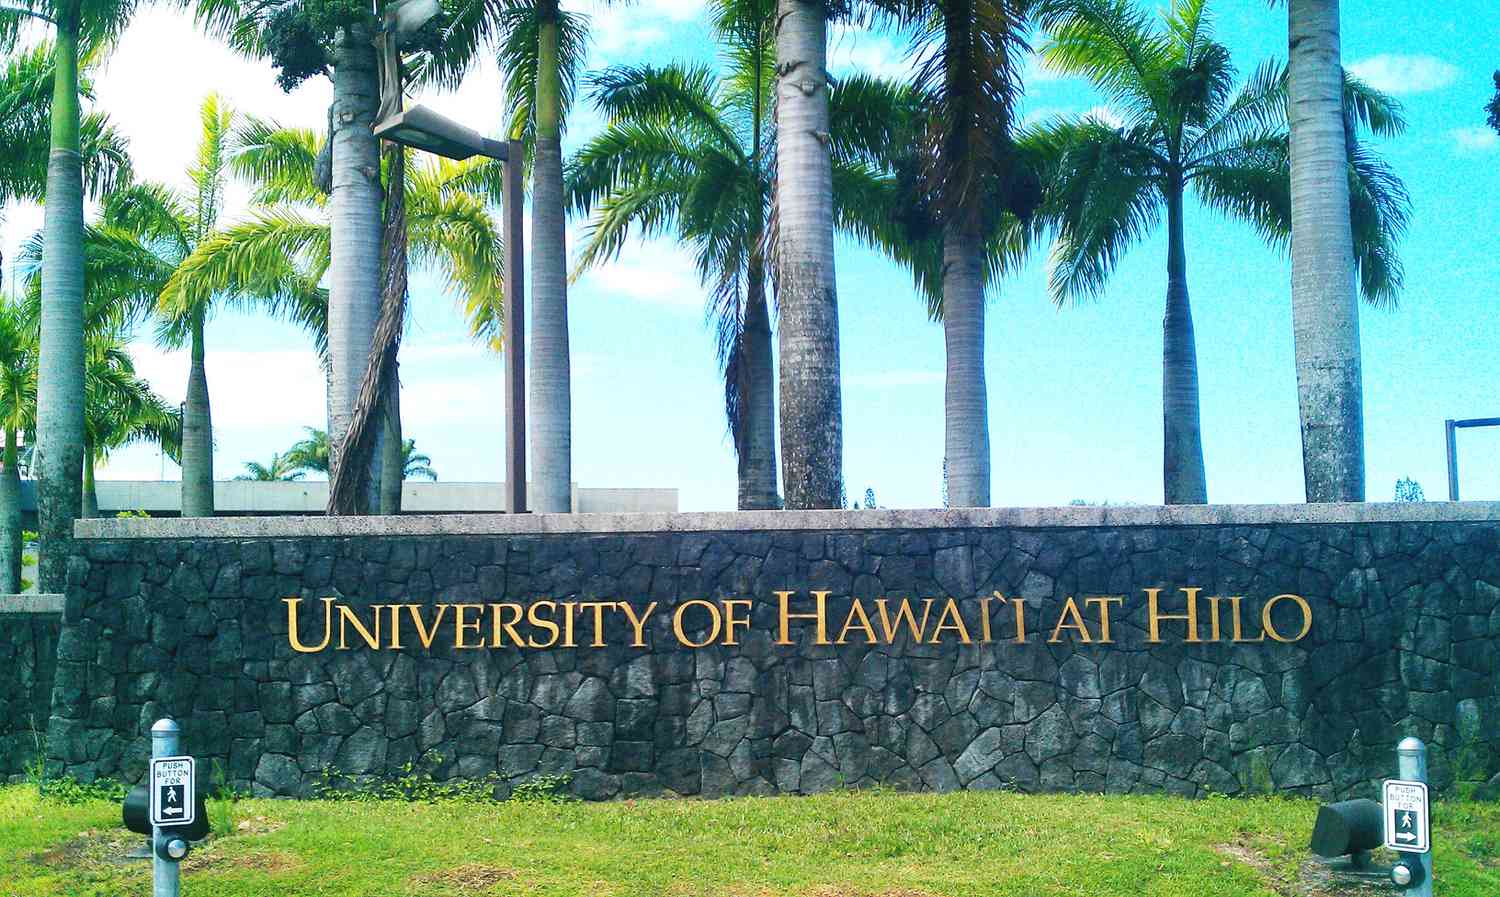 17-captivating-facts-about-university-of-hawaii-at-hilo